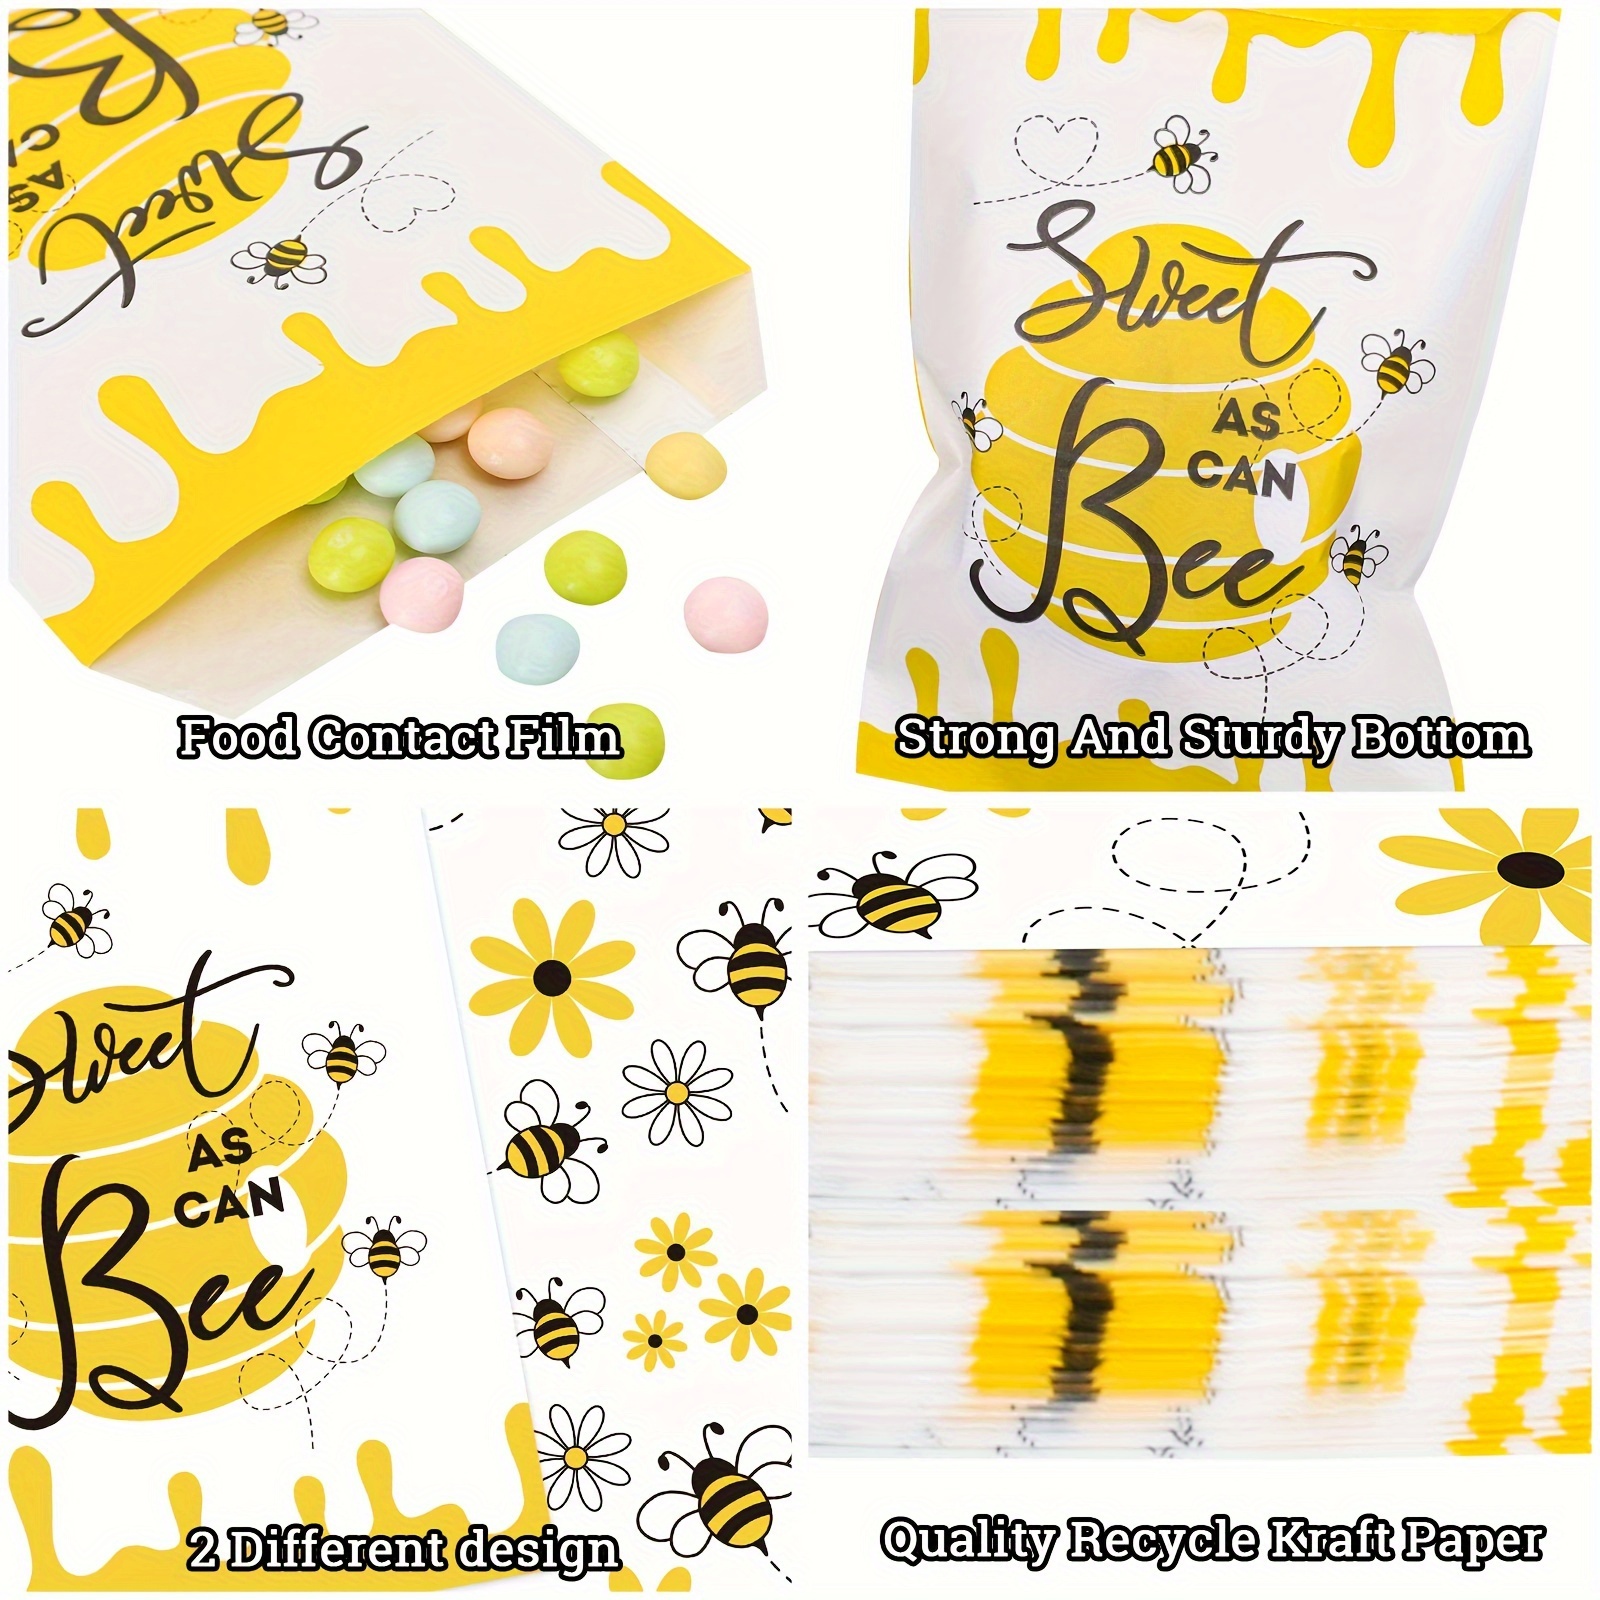 120 Honey Bee Party theme ideas  bee party, bee baby shower, bee